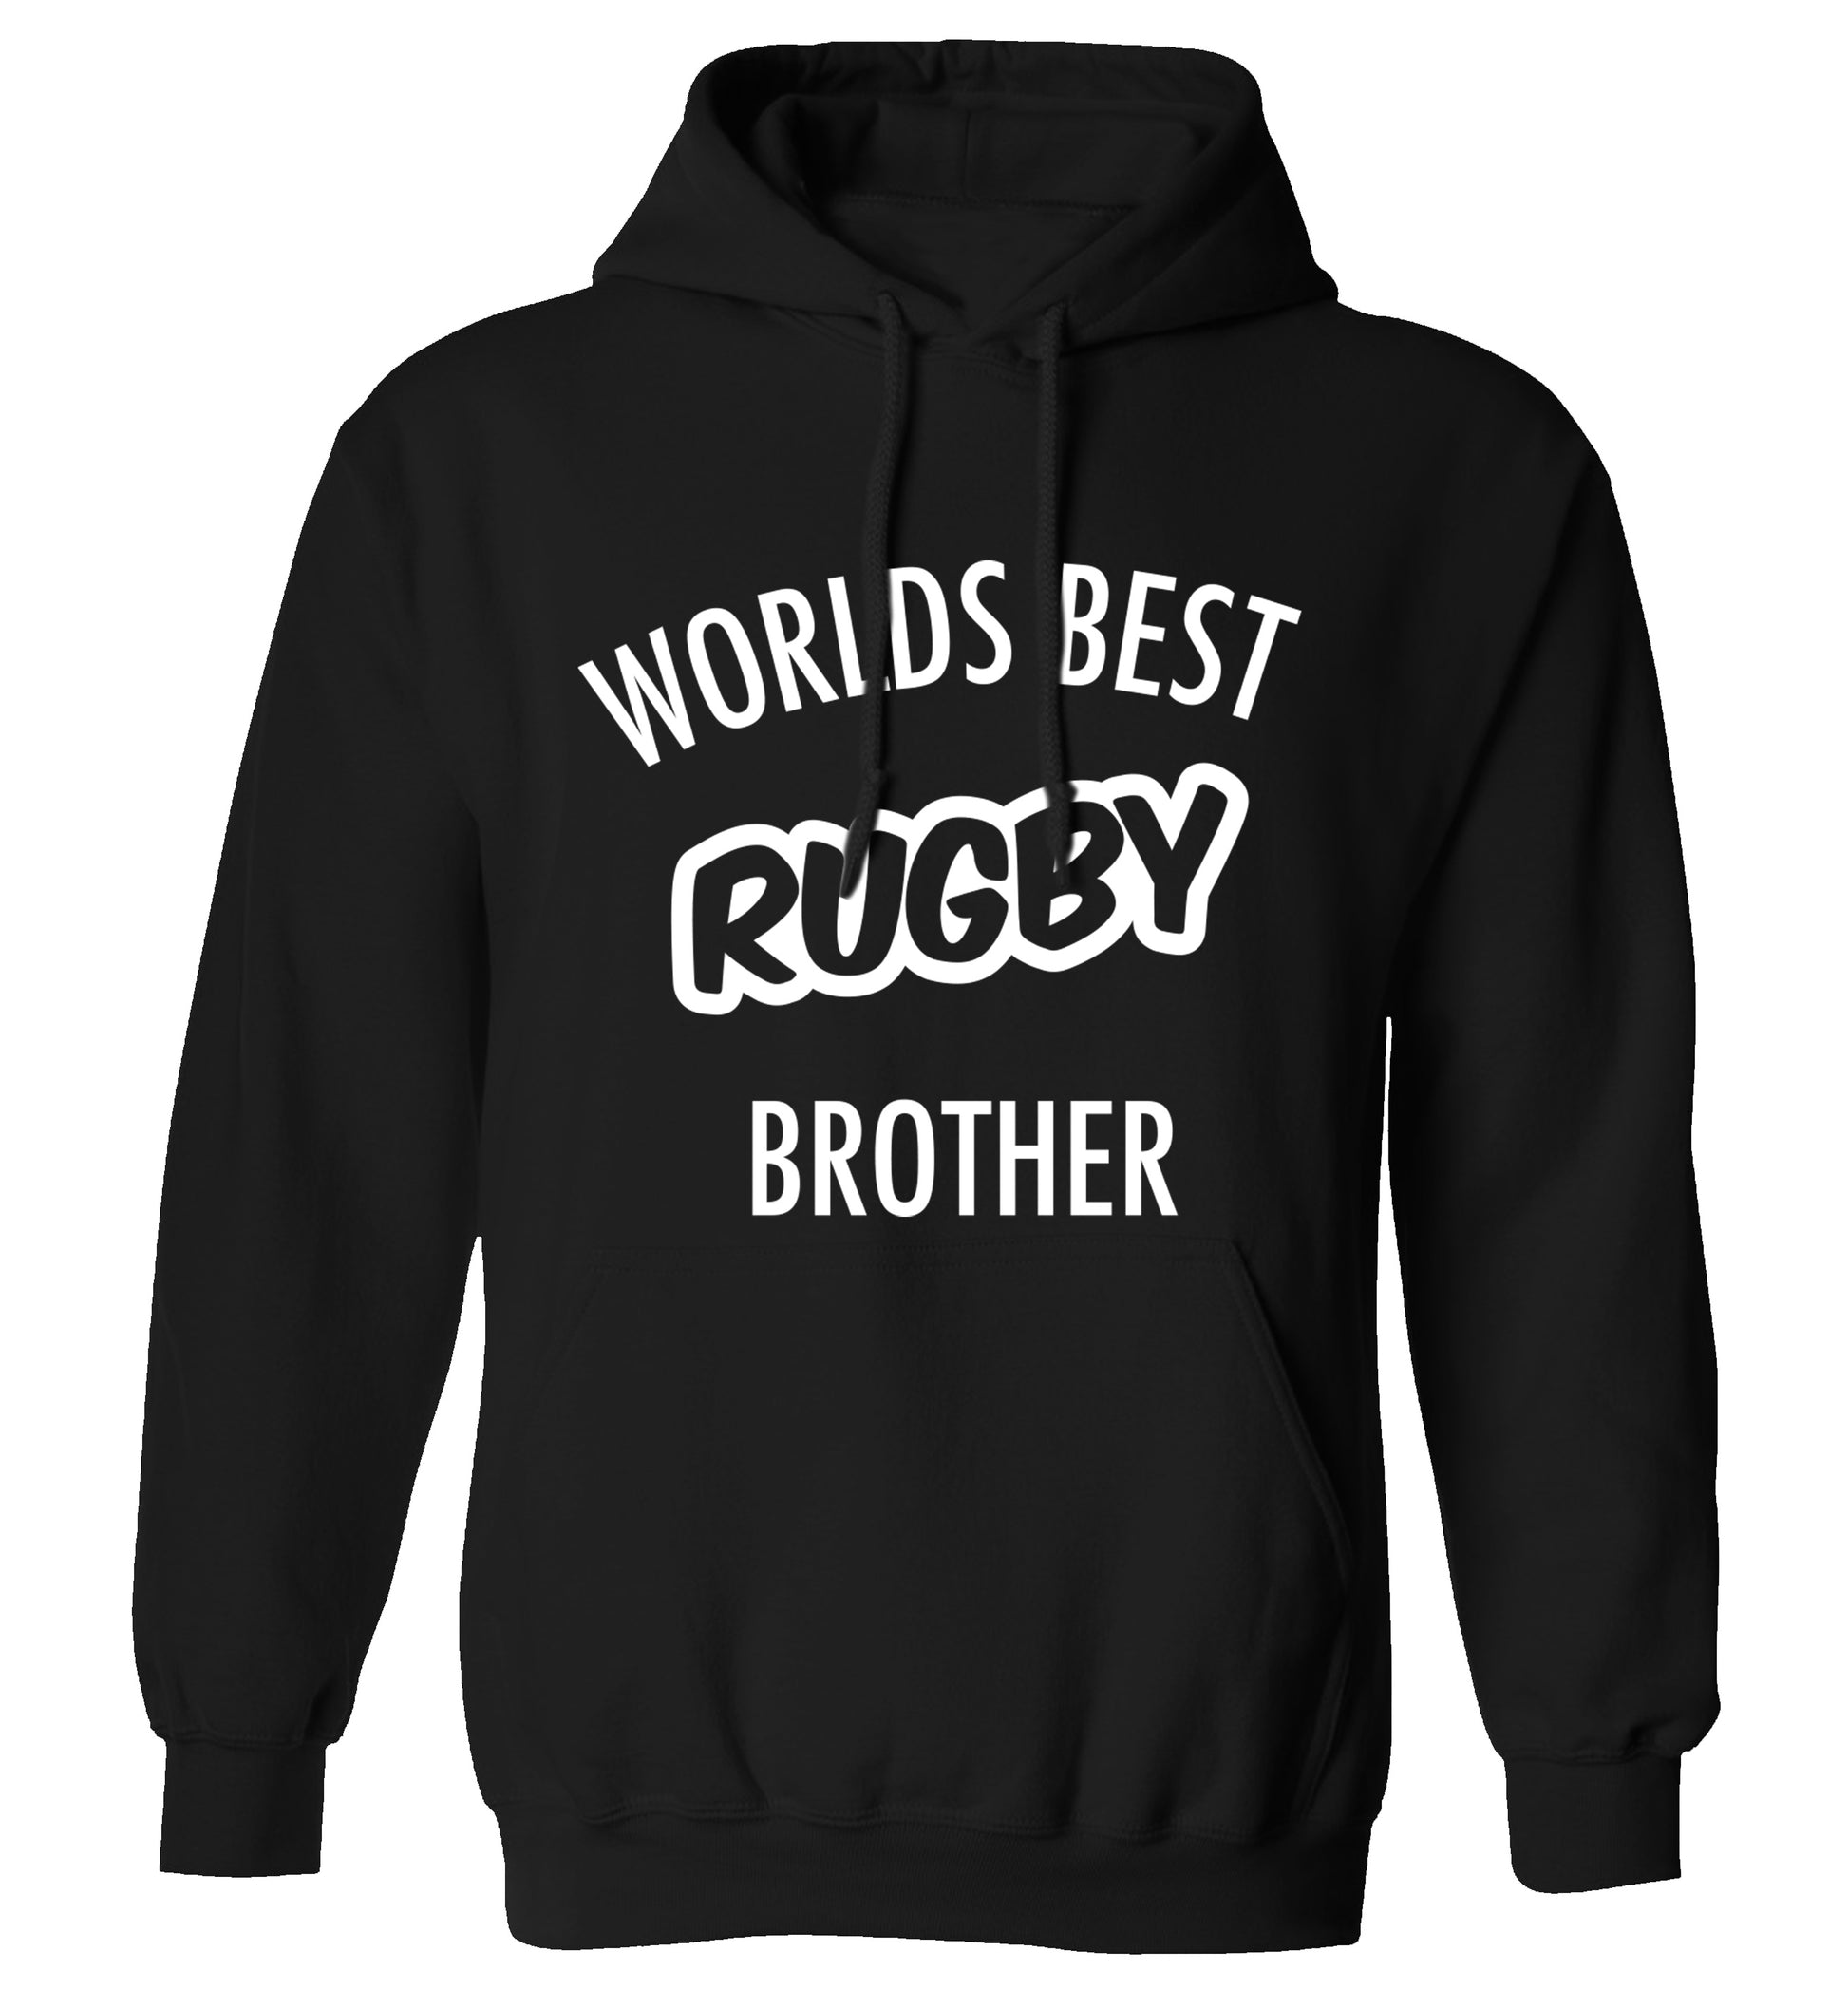 Worlds best rugby brother adults unisex black hoodie 2XL